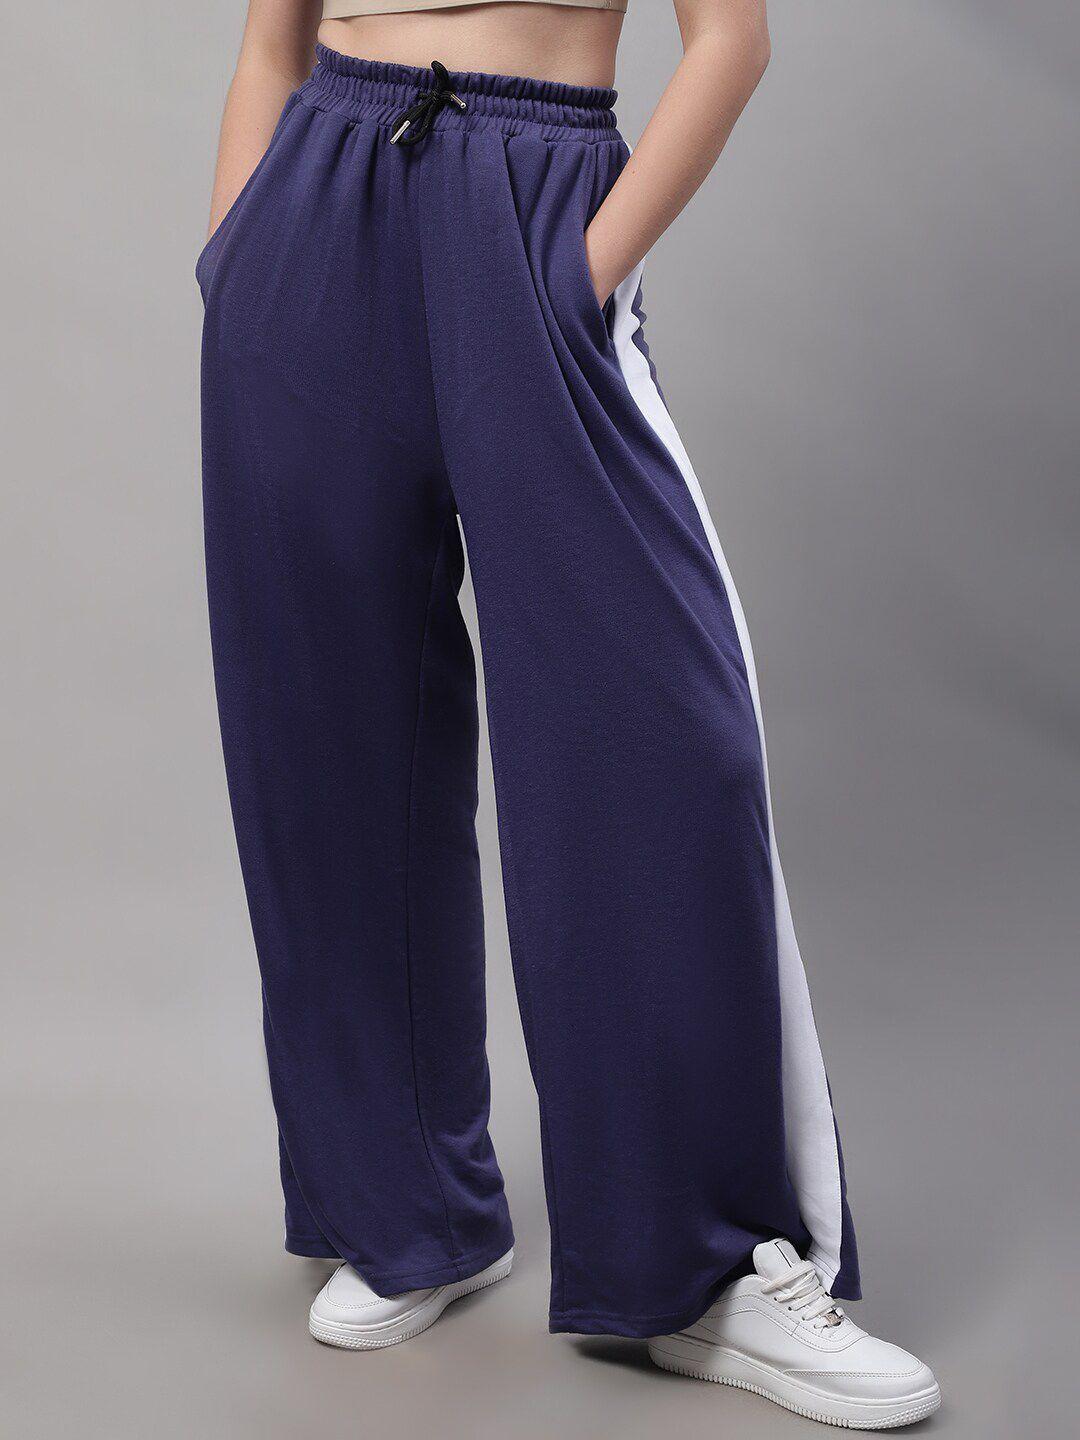 door74-women-colourblocked-relaxed-fit-cotton-track-pants